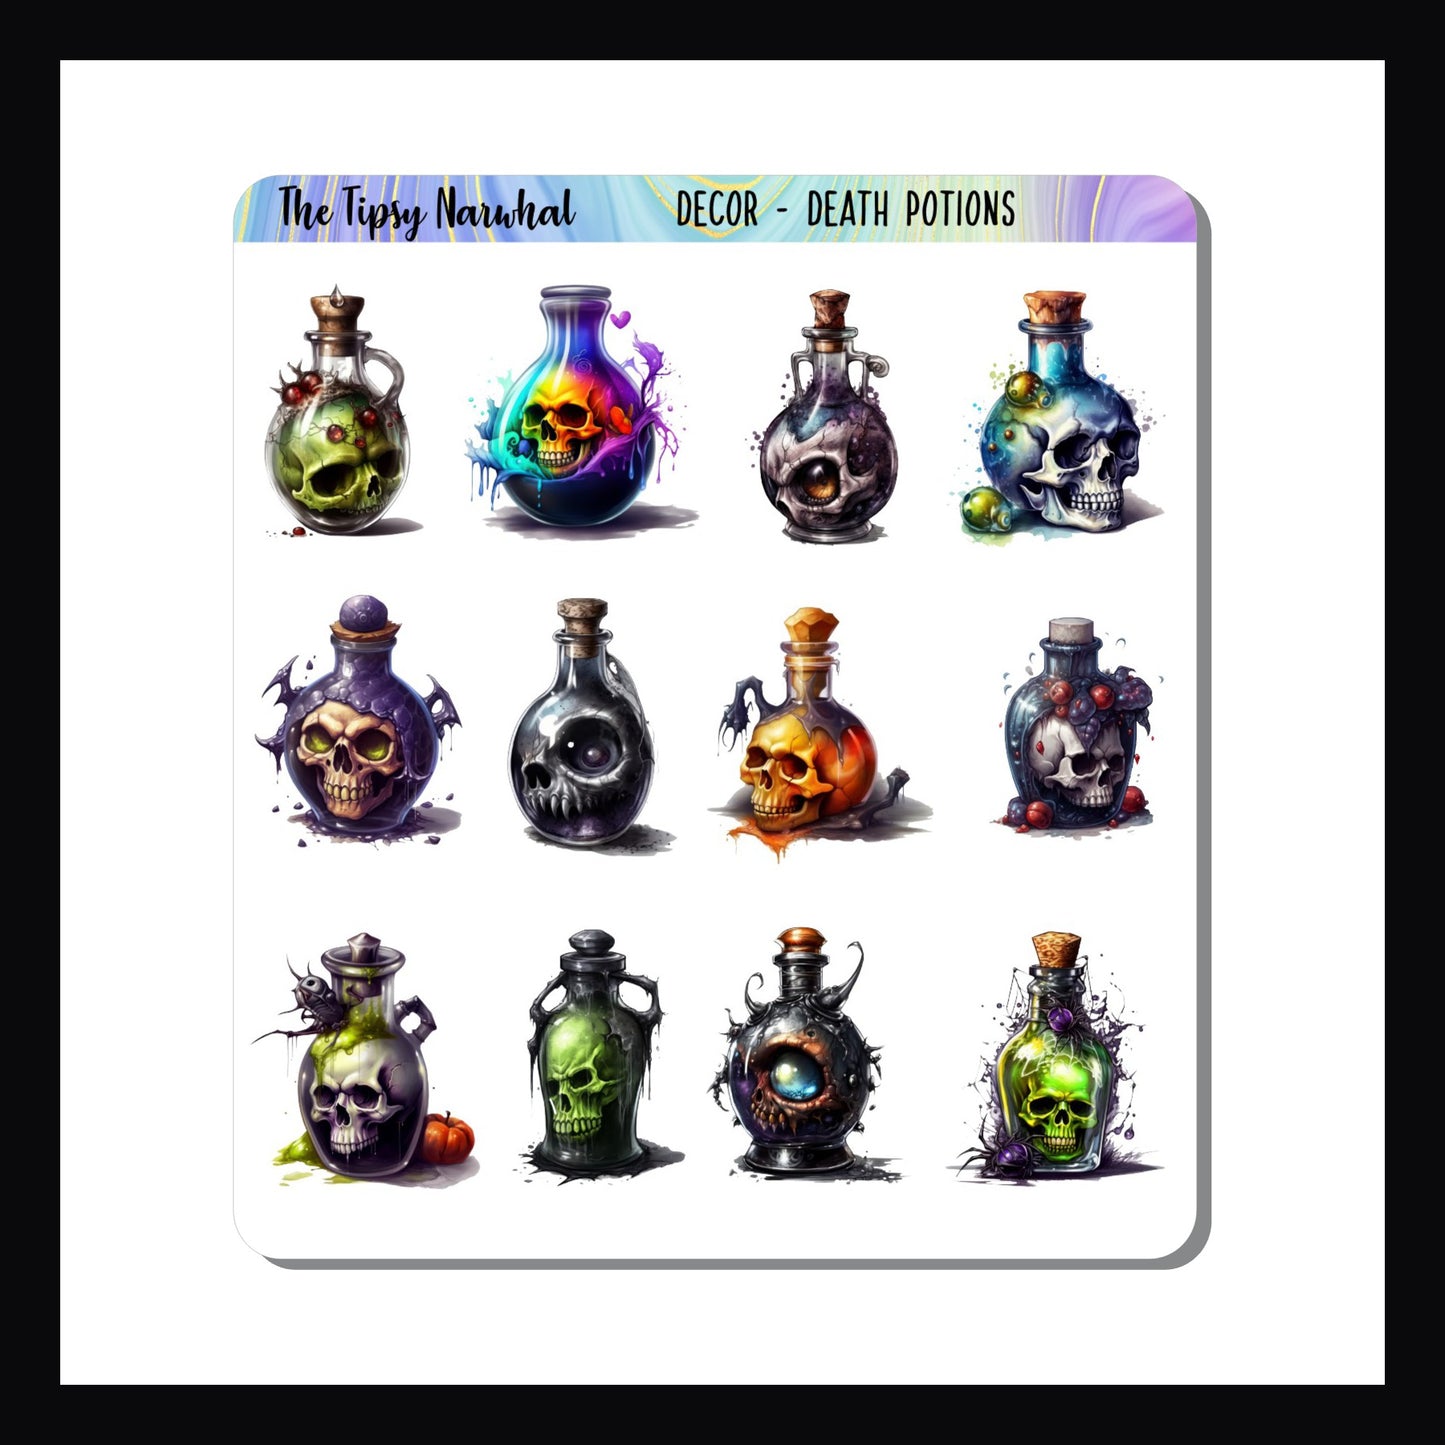 Deadly Potions stickers, multiple colorful vials of deadly potions, skulls, horror, spooky stickers, glass vials, corks, death, pumpkins, dark magic, spiders, cobwebs, witchy, potions, vials